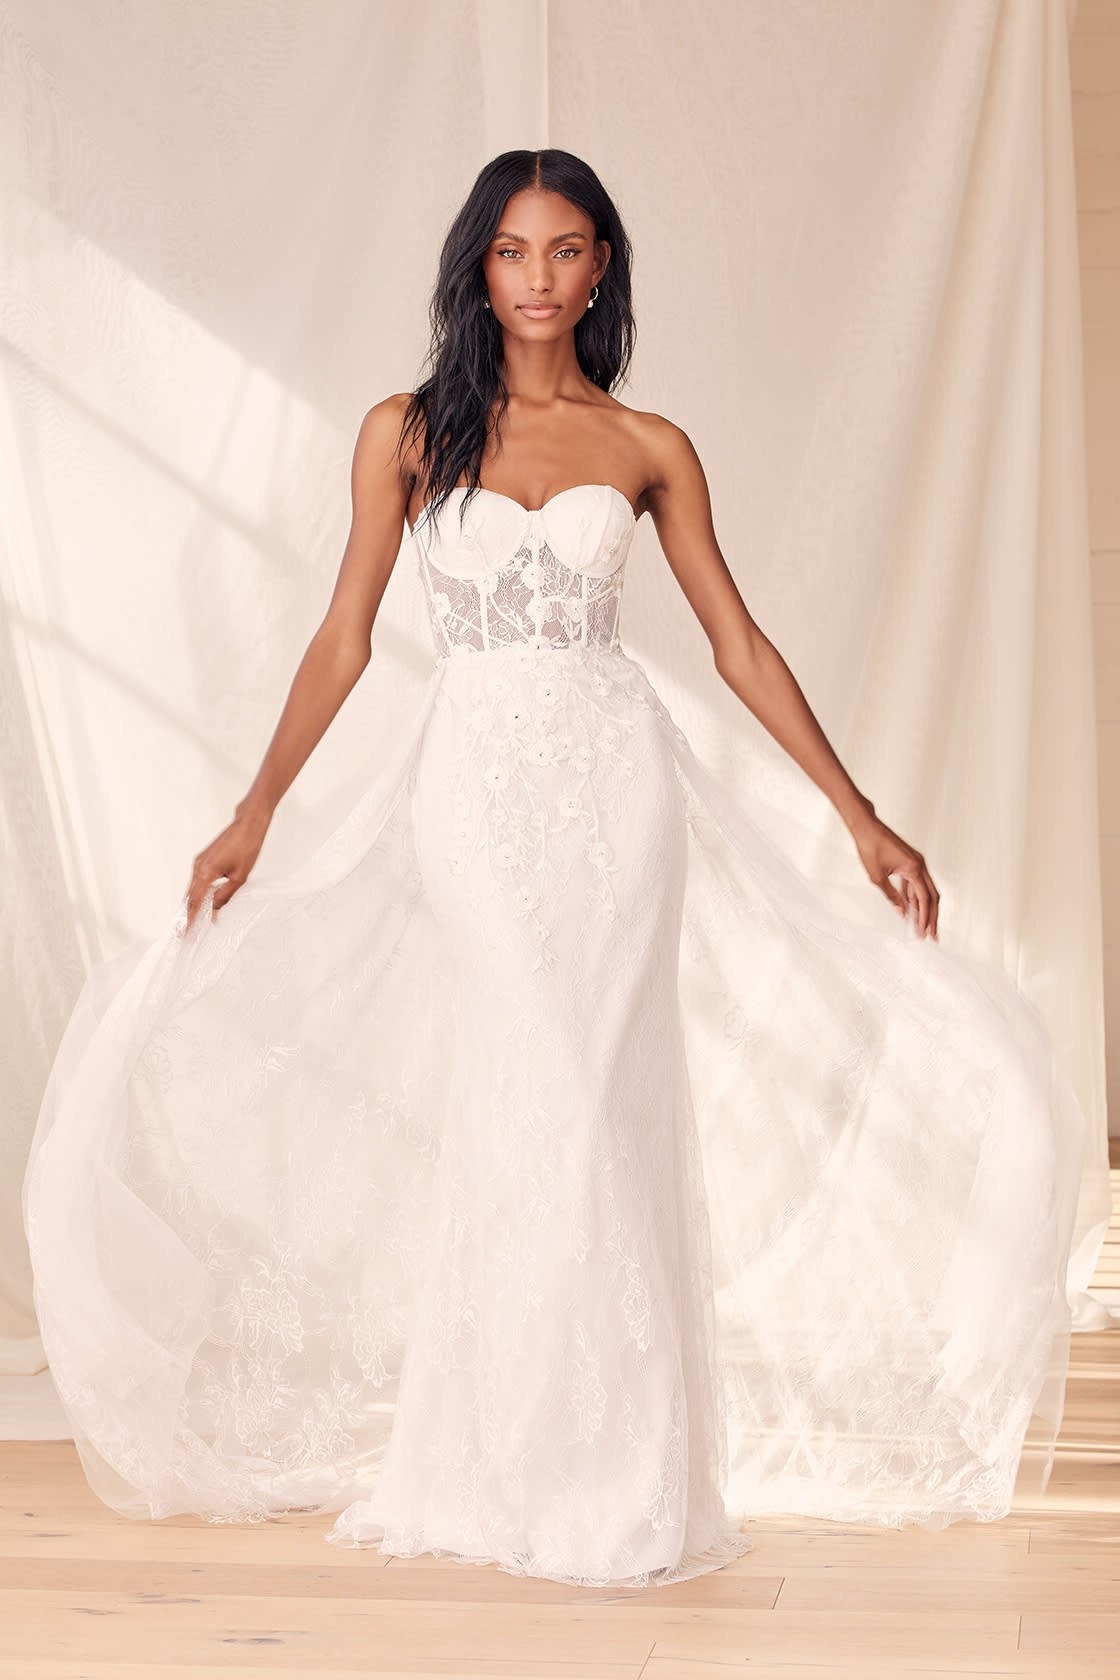 Lace Wedding Dresses UK, Cheap Lace Bridal Gowns Online - uk.millybridal.org